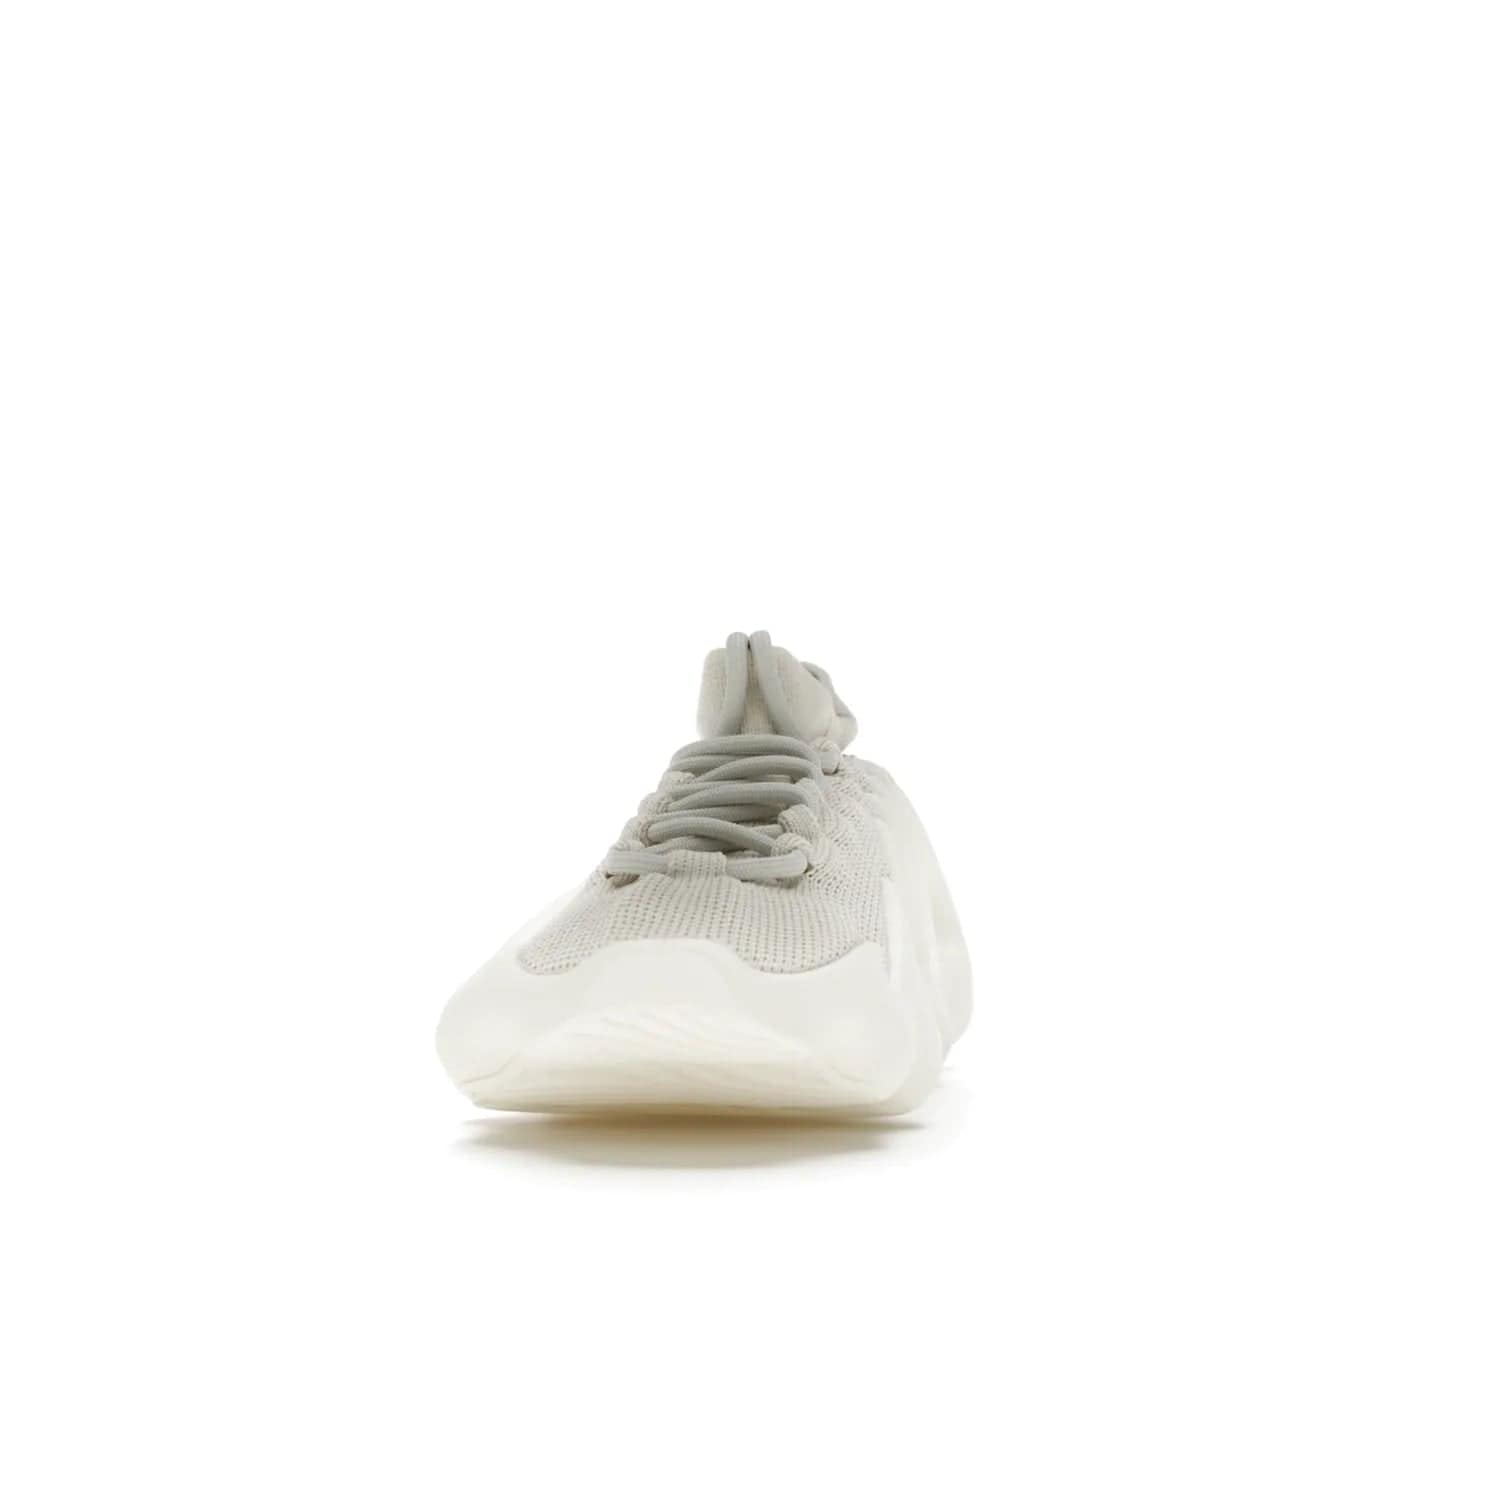 adidas Yeezy 450 Cloud White - Image 11 - Only at www.BallersClubKickz.com - Experience the future with the adidas Yeezy 450 Cloud White. A two-piece design featuring an extreme foam sole and mesh upper, this silhouette is expected to release in March 2021. Get your hands on this striking Cloud White/Cloud White colorway and stand out in the crowd.